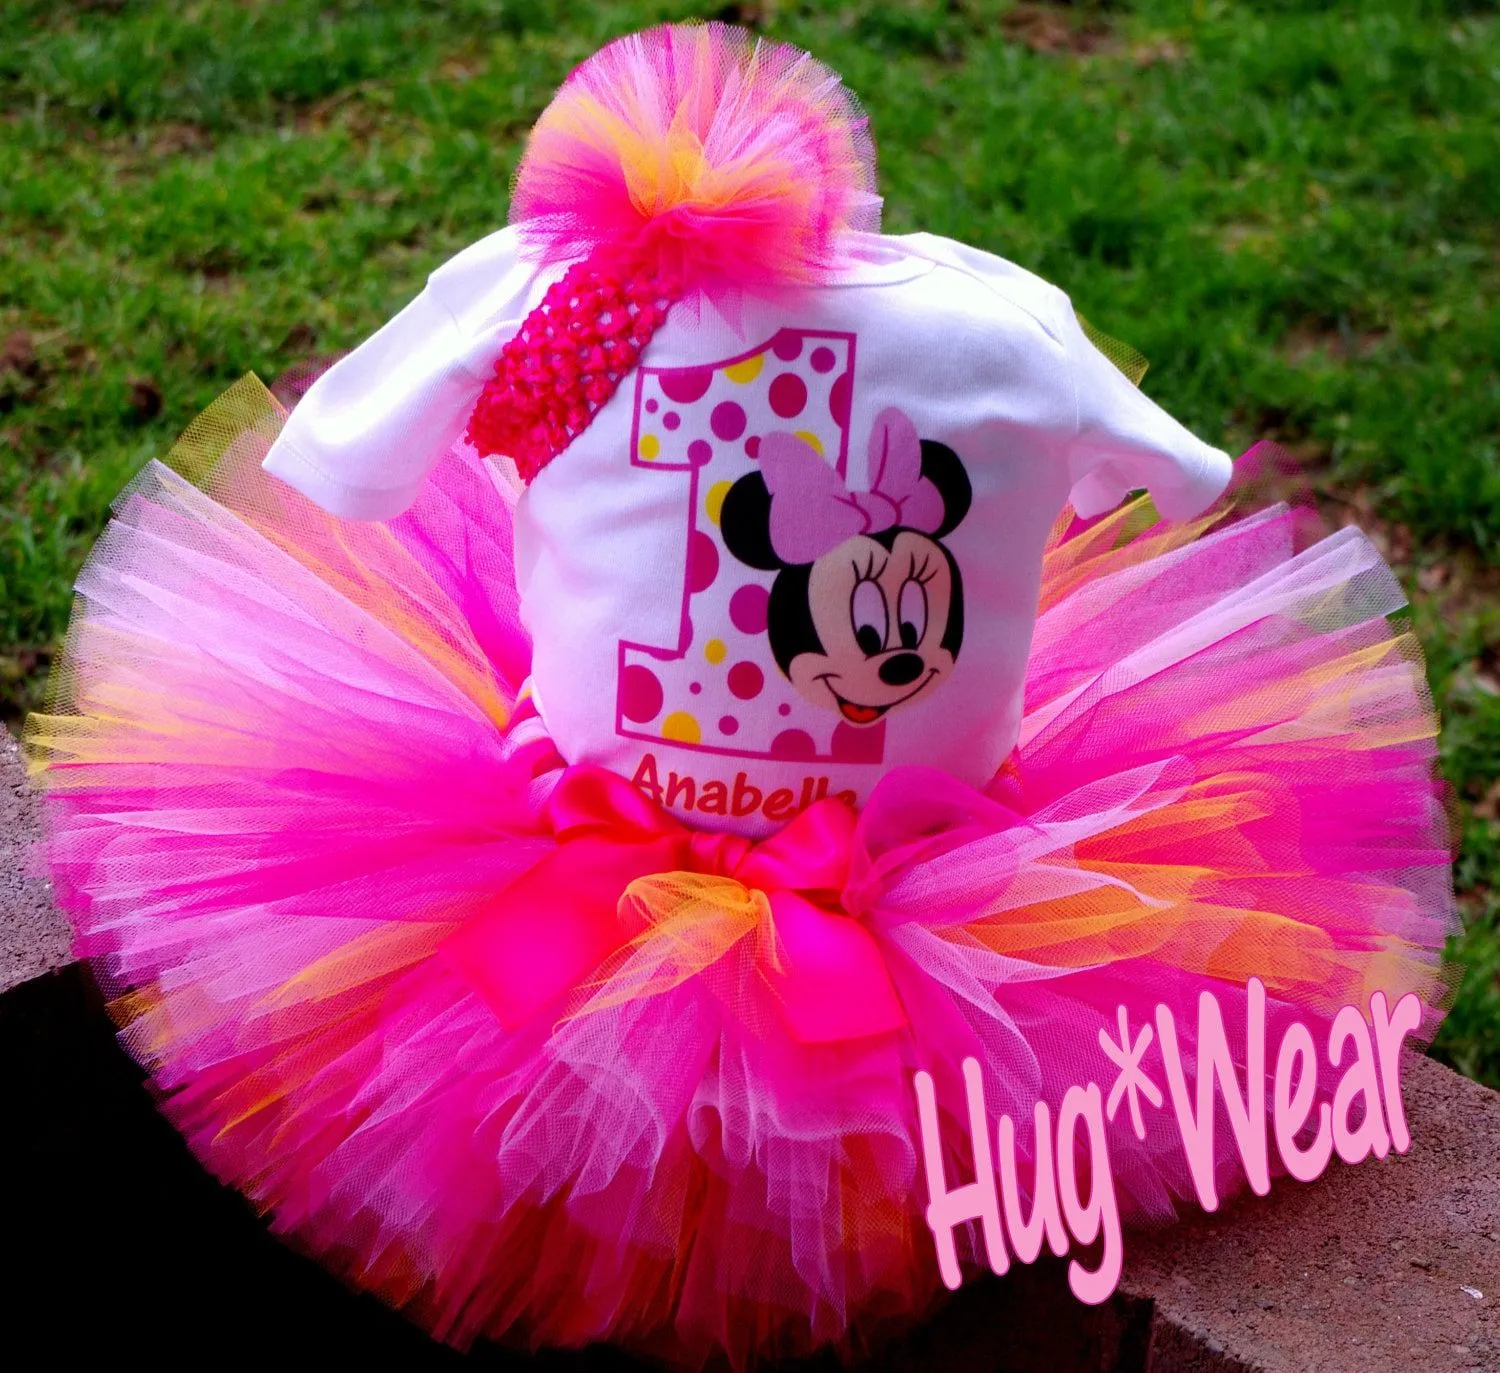 Popular items for minnie mouse on Etsy